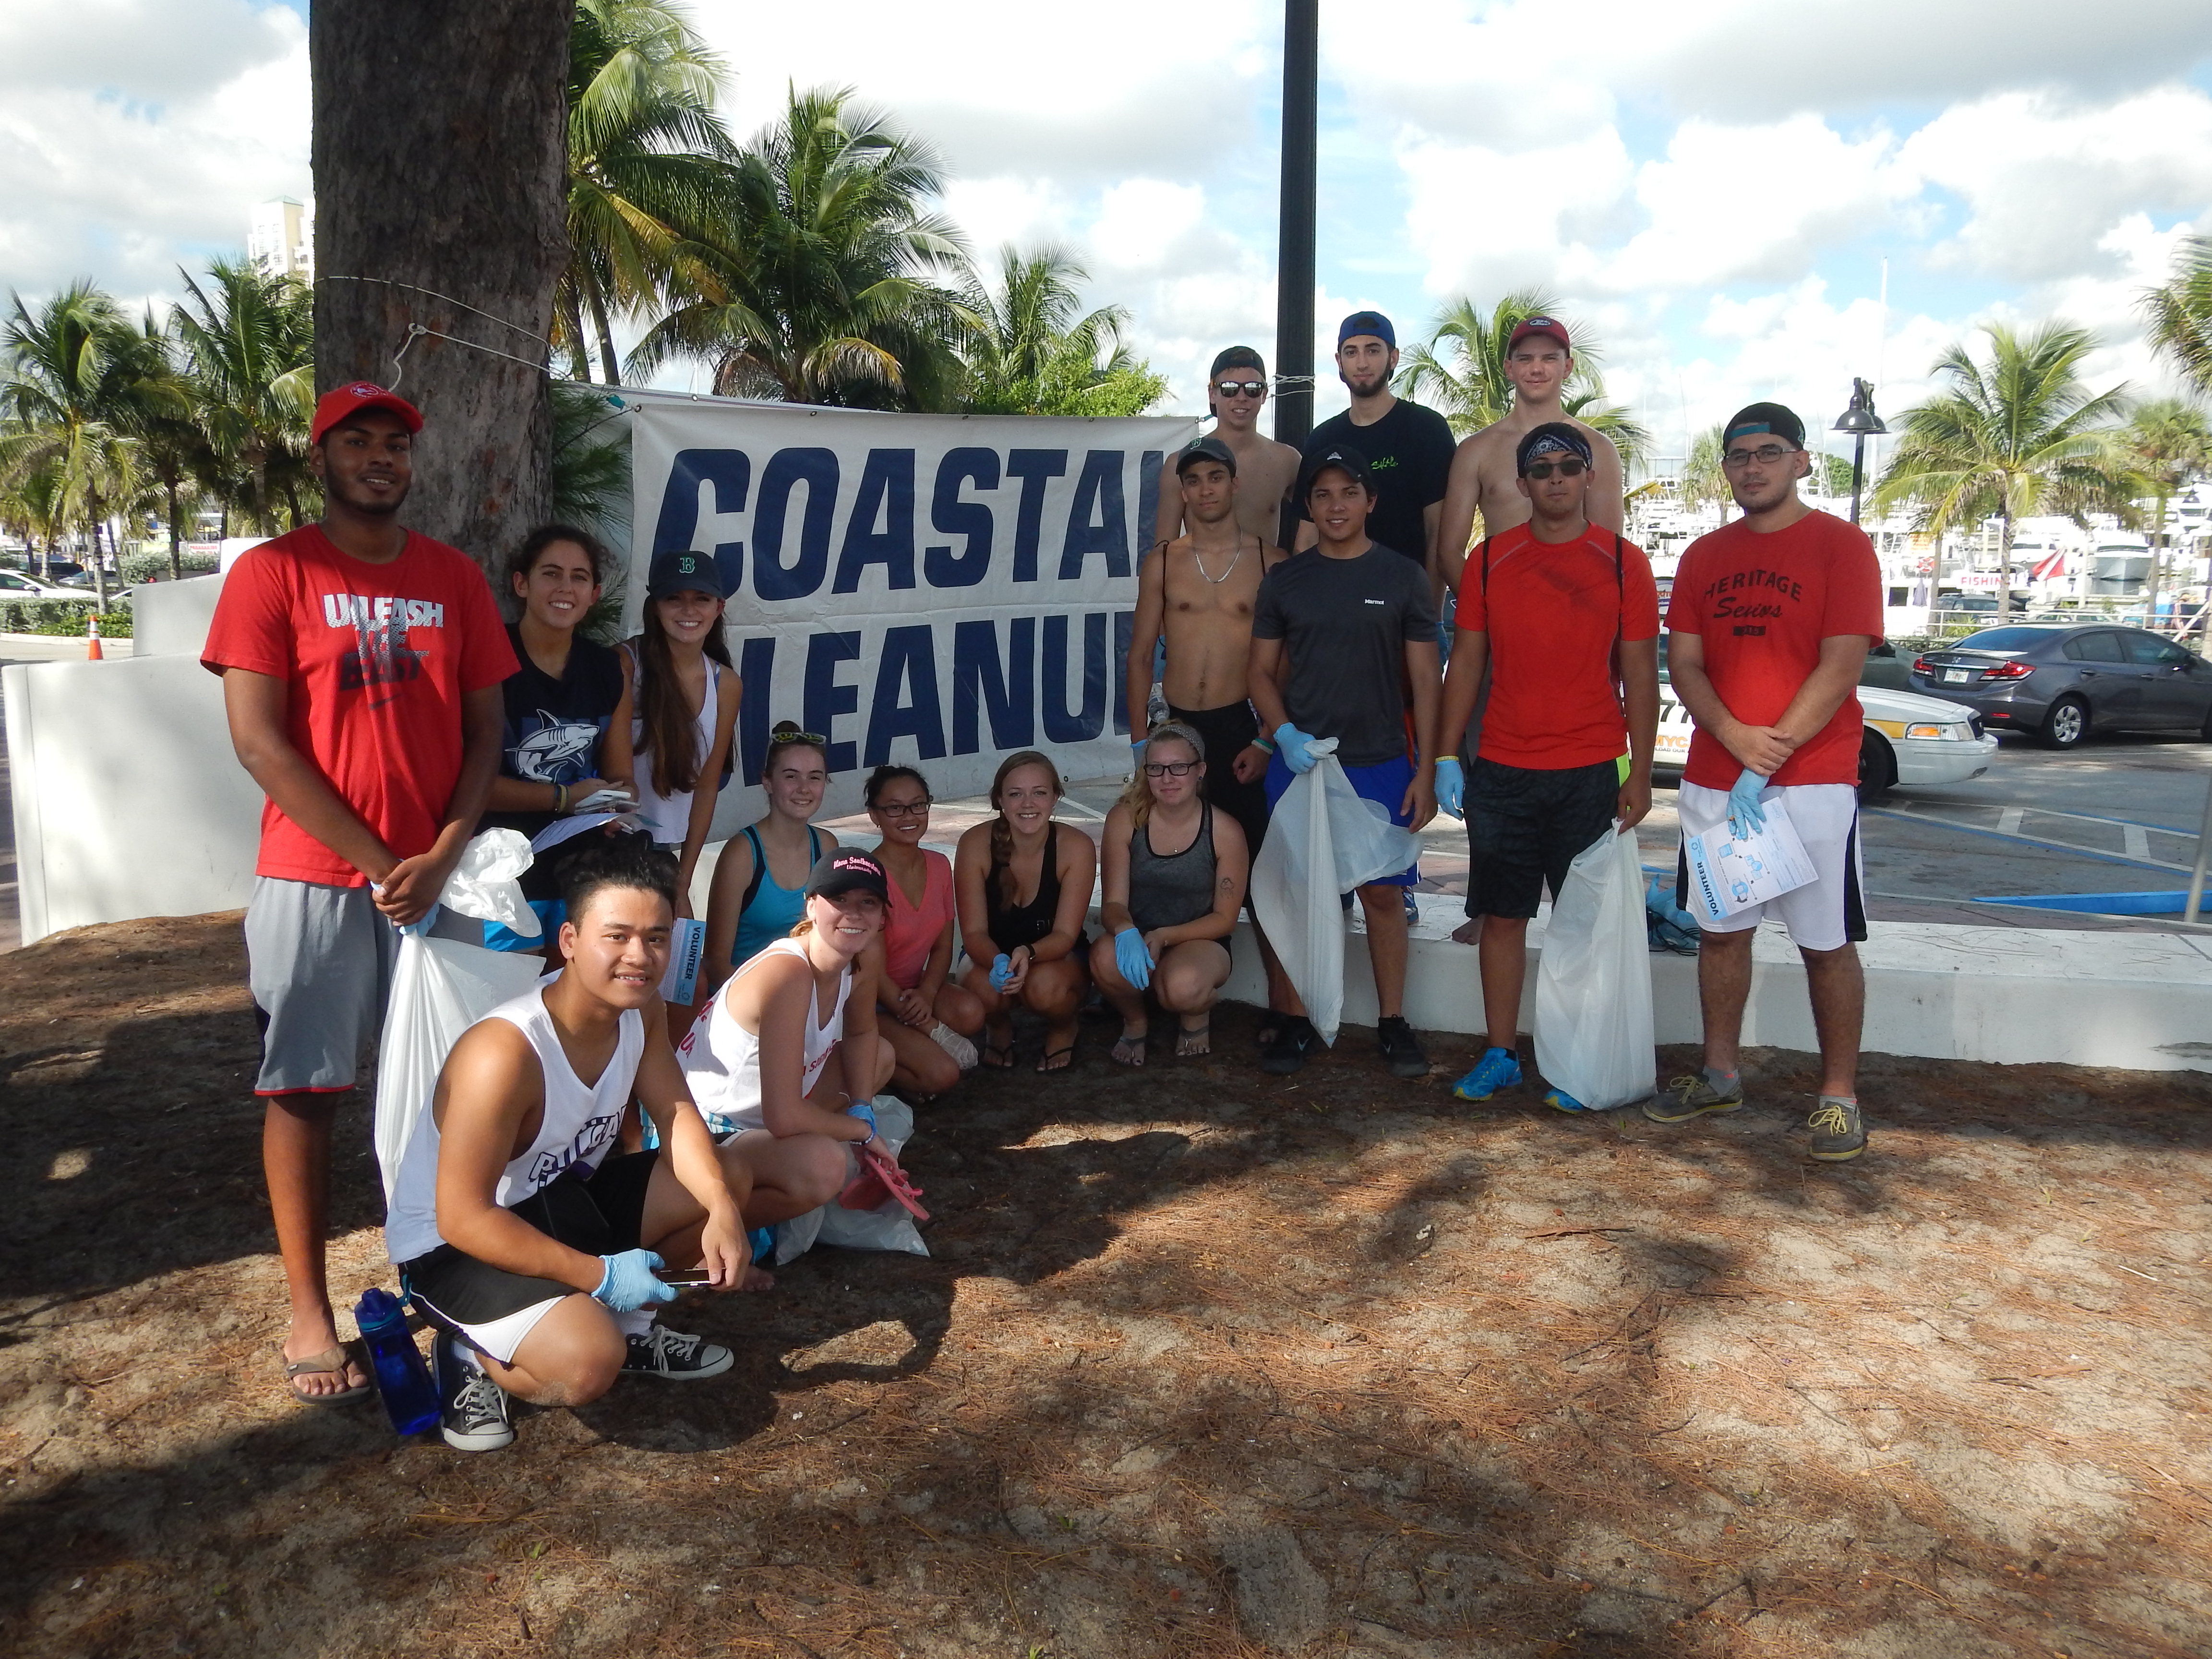 Students Can Earn Service Hours at 34th Annual International Coastal Cleanup